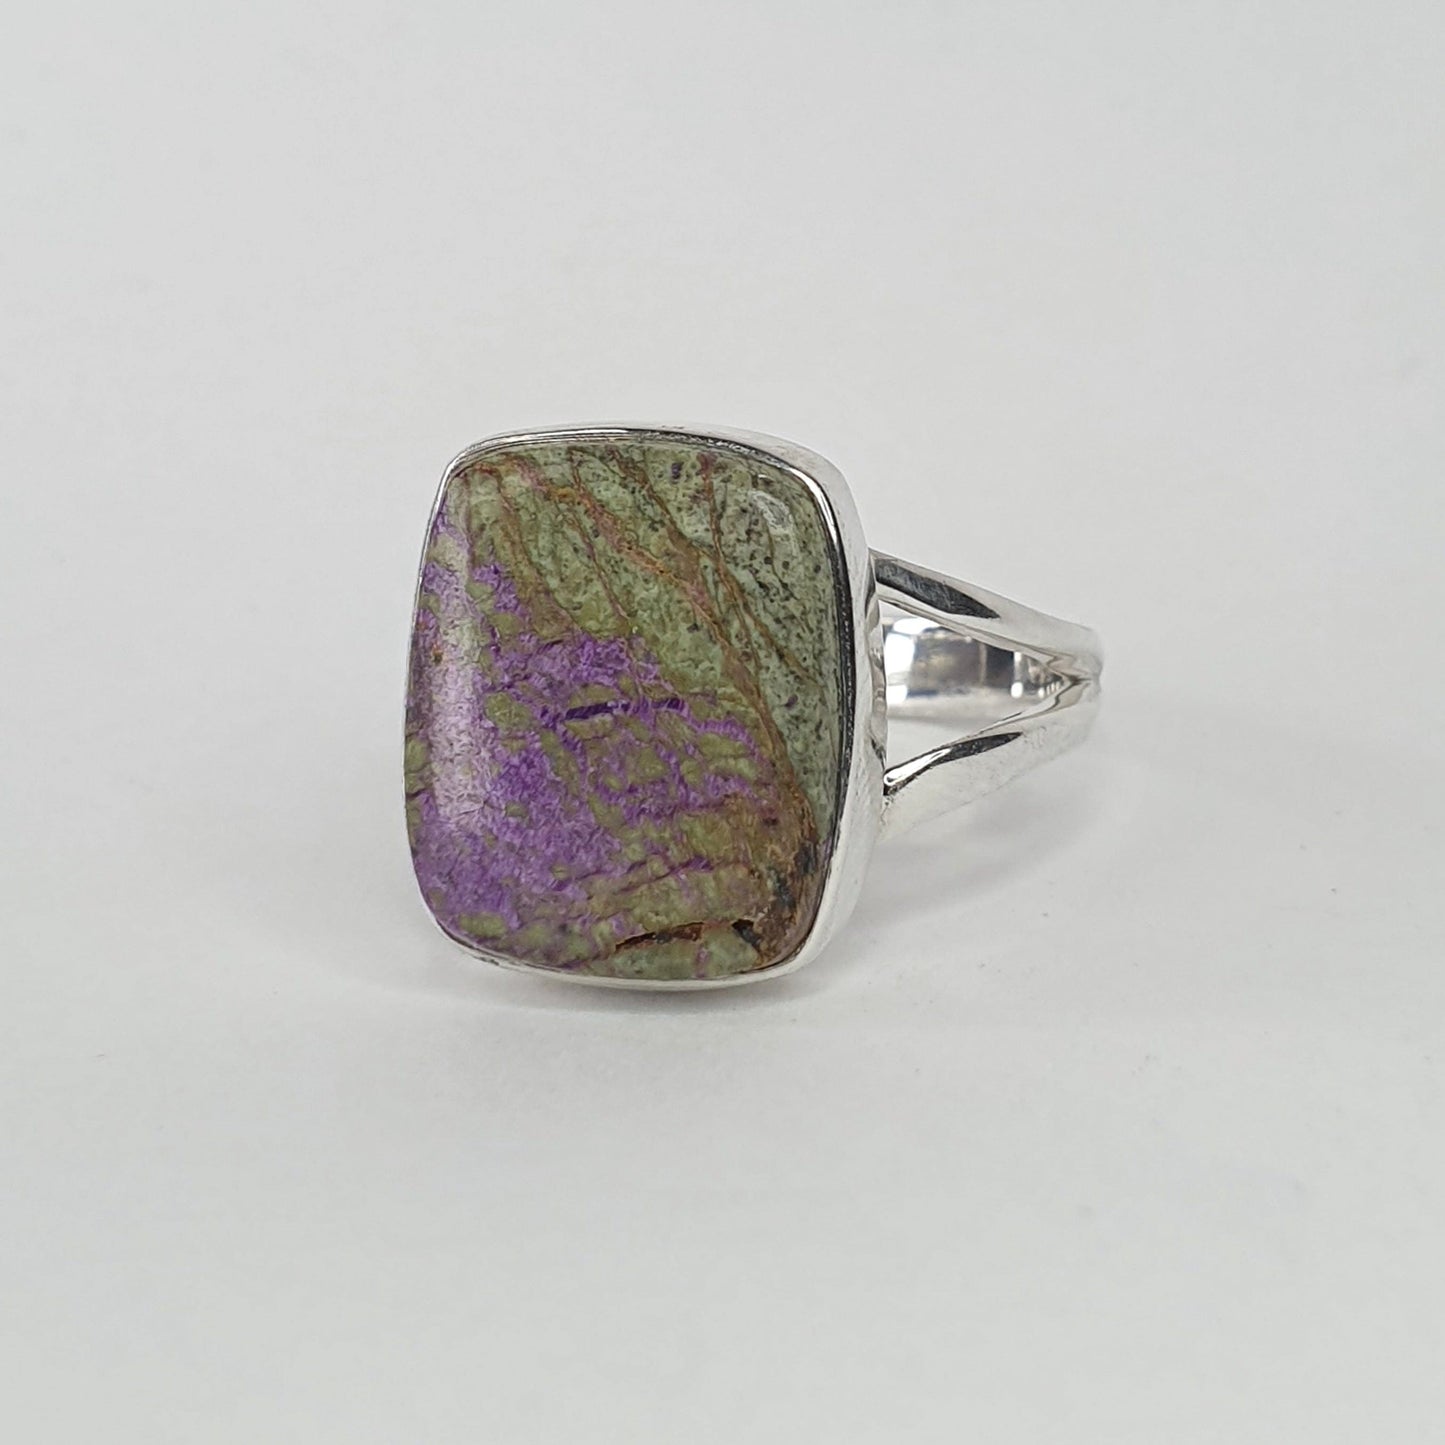 Stitchtite and Serpentine Ring - ON SALE